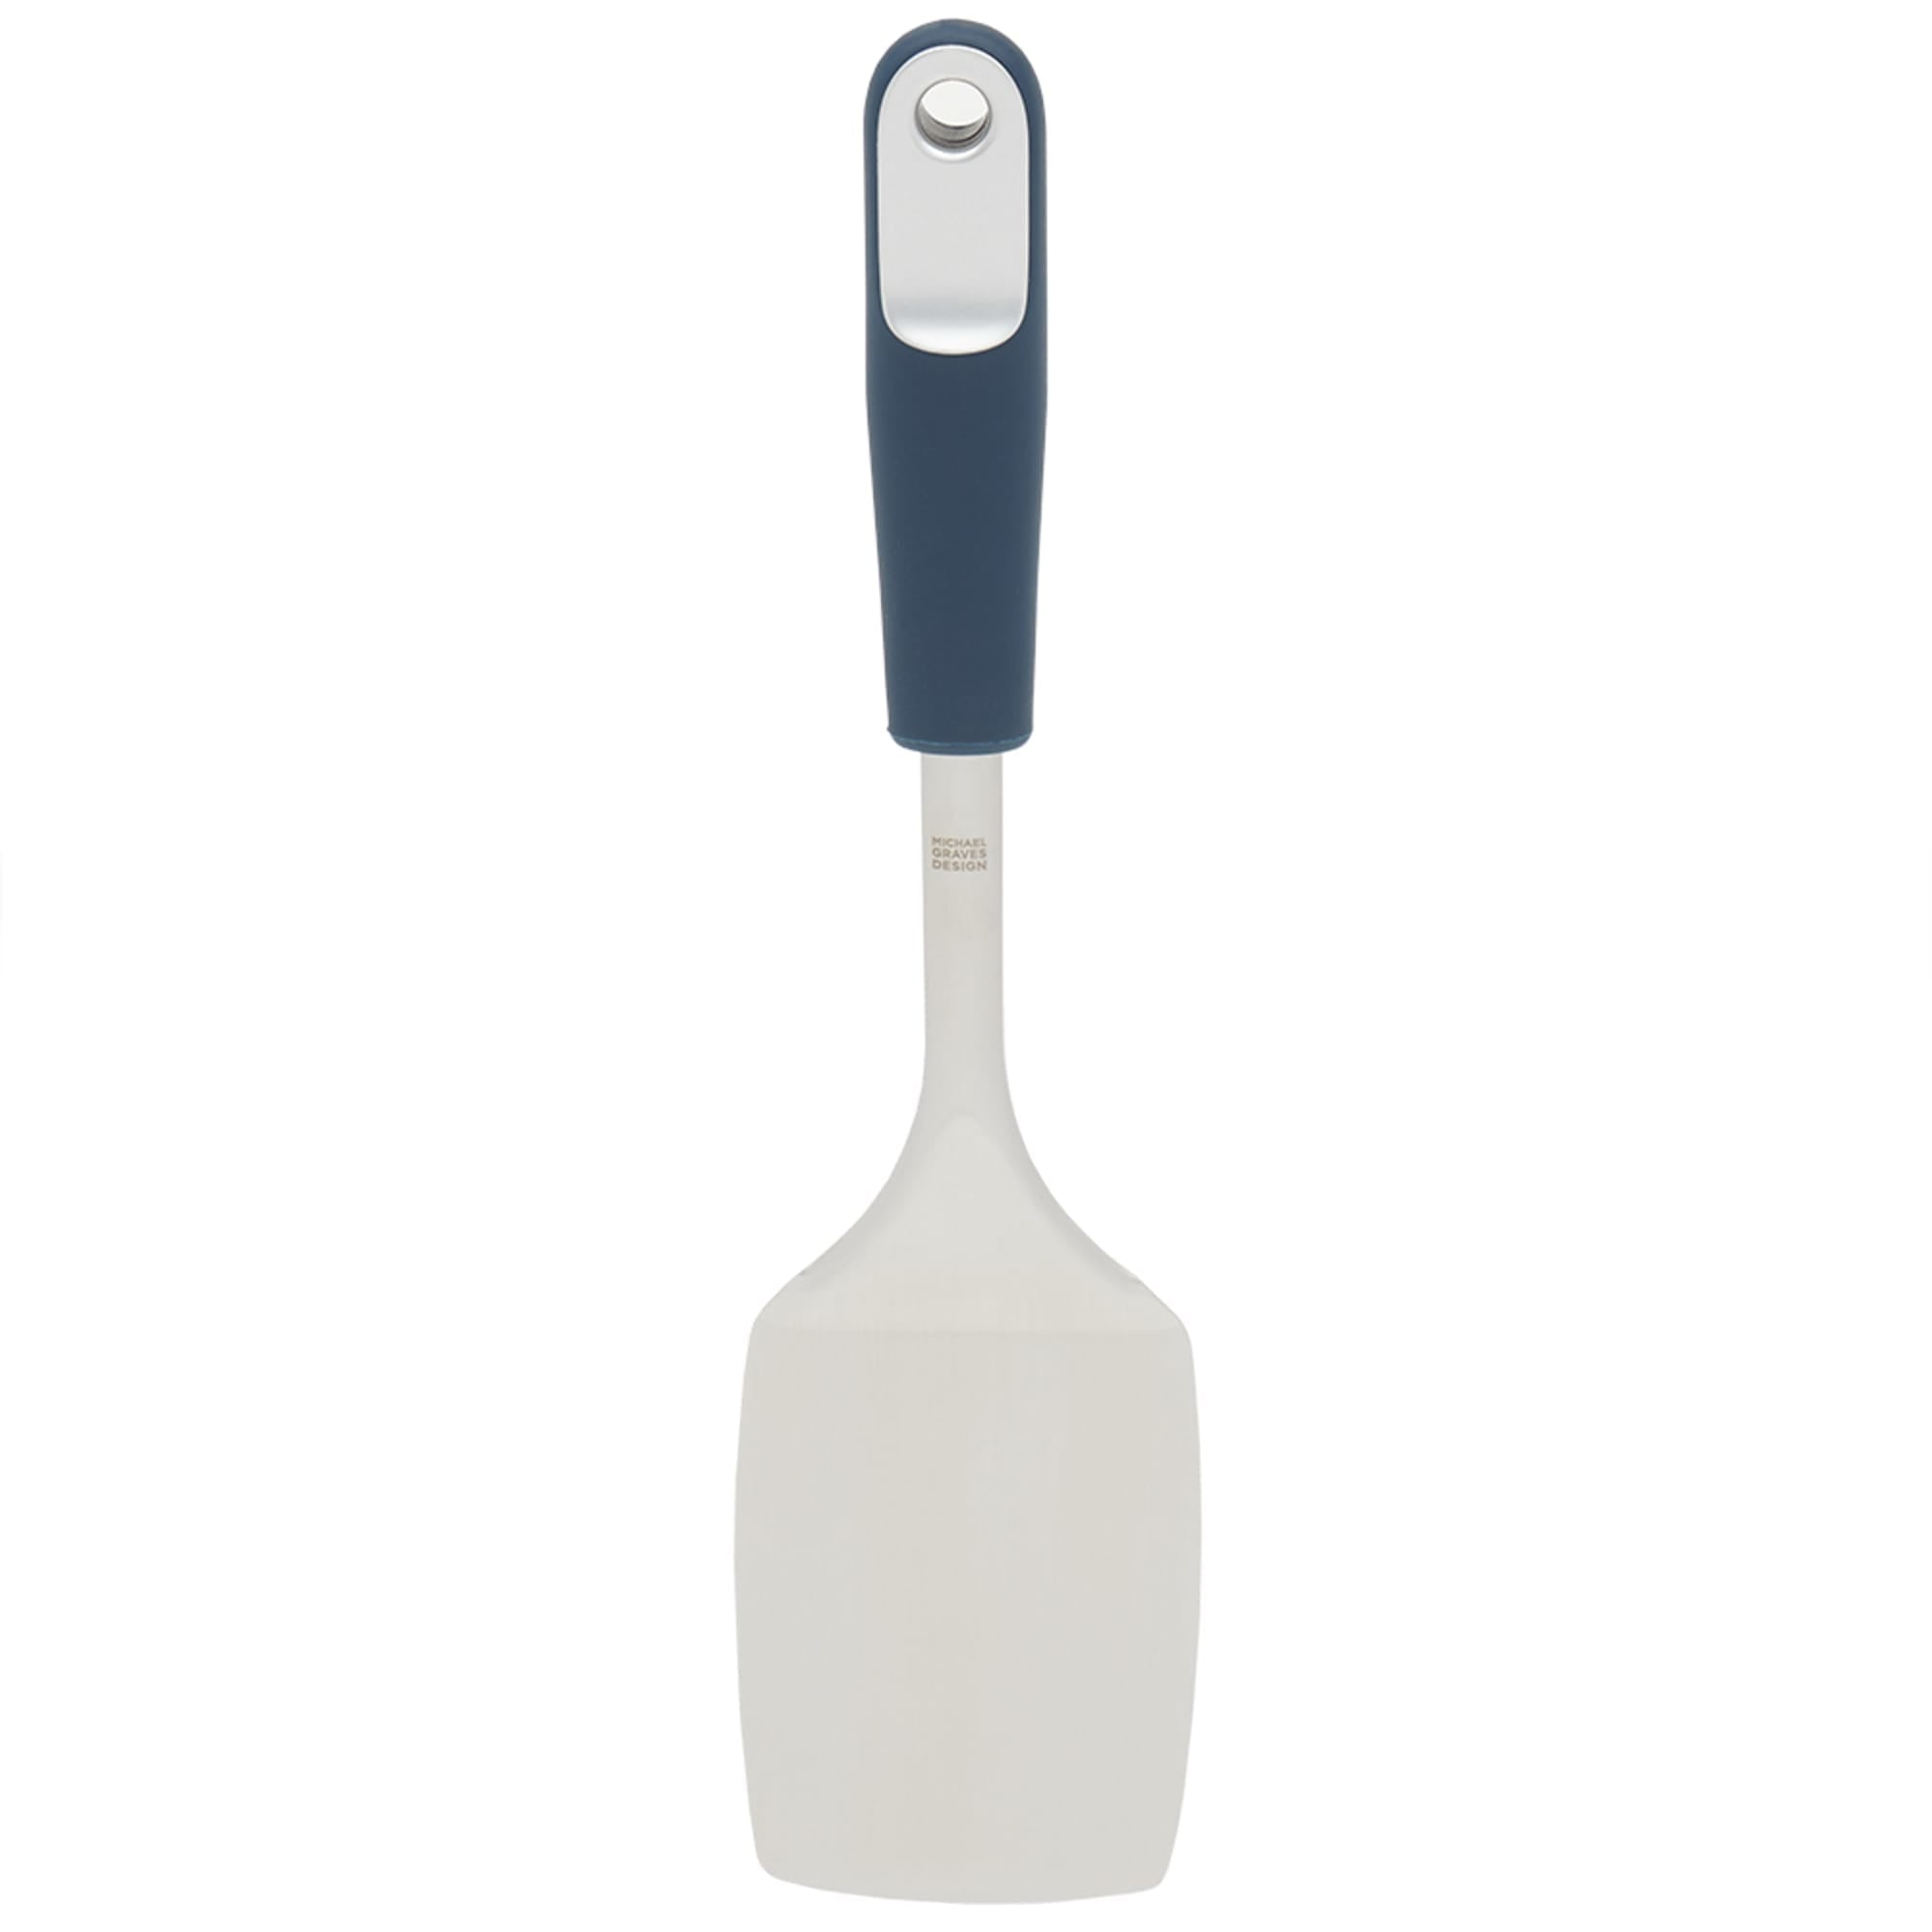 Michael Graves Design Comfortable Grip Stainless Steel Spatula, Indigo $4.00 EACH, CASE PACK OF 24